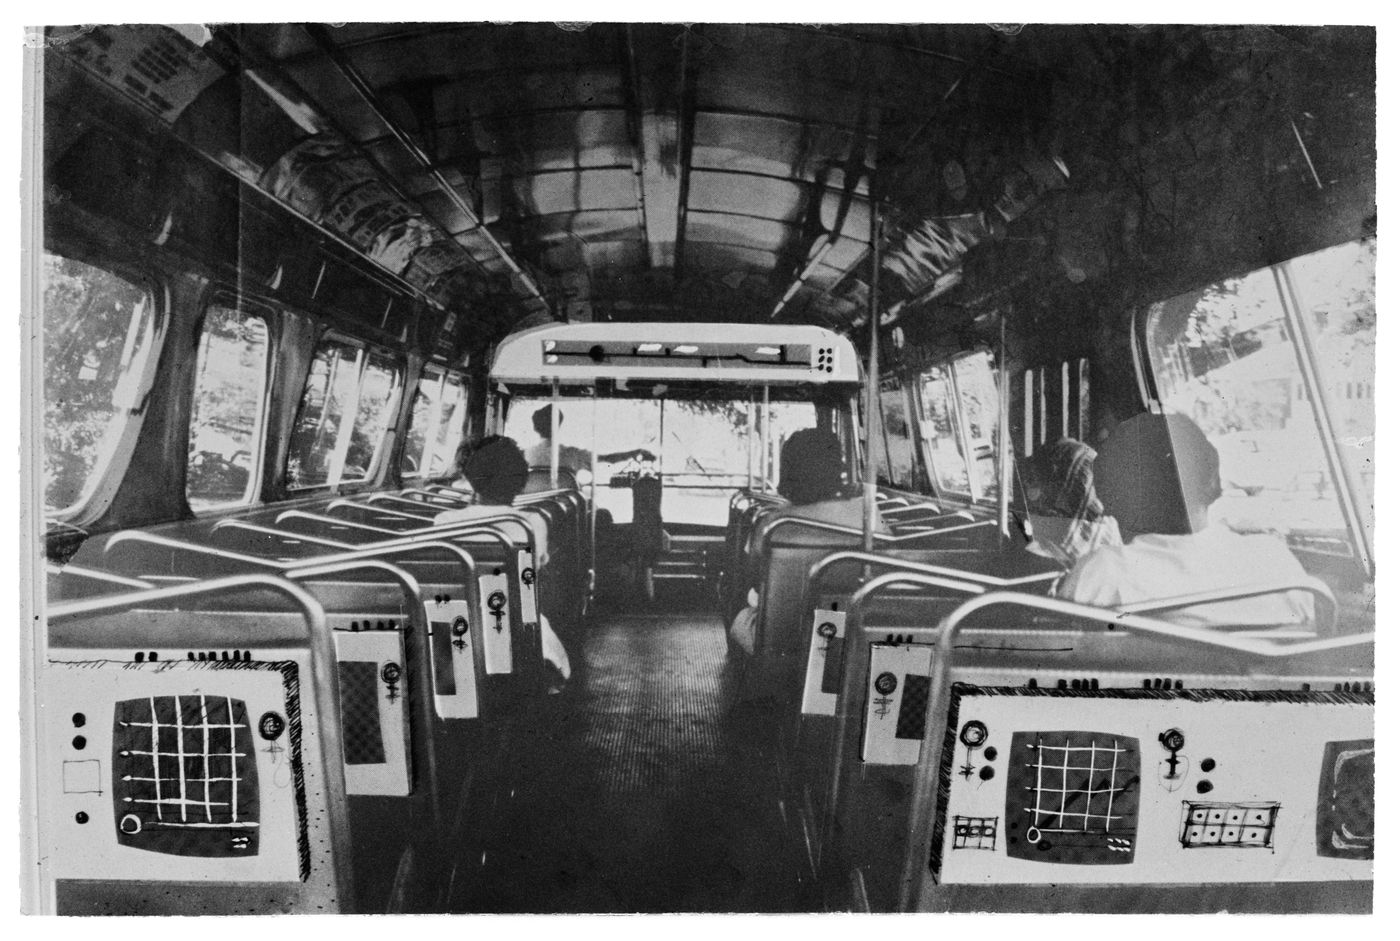 Atom: interior of bus showing seats equipped with electronic display devices